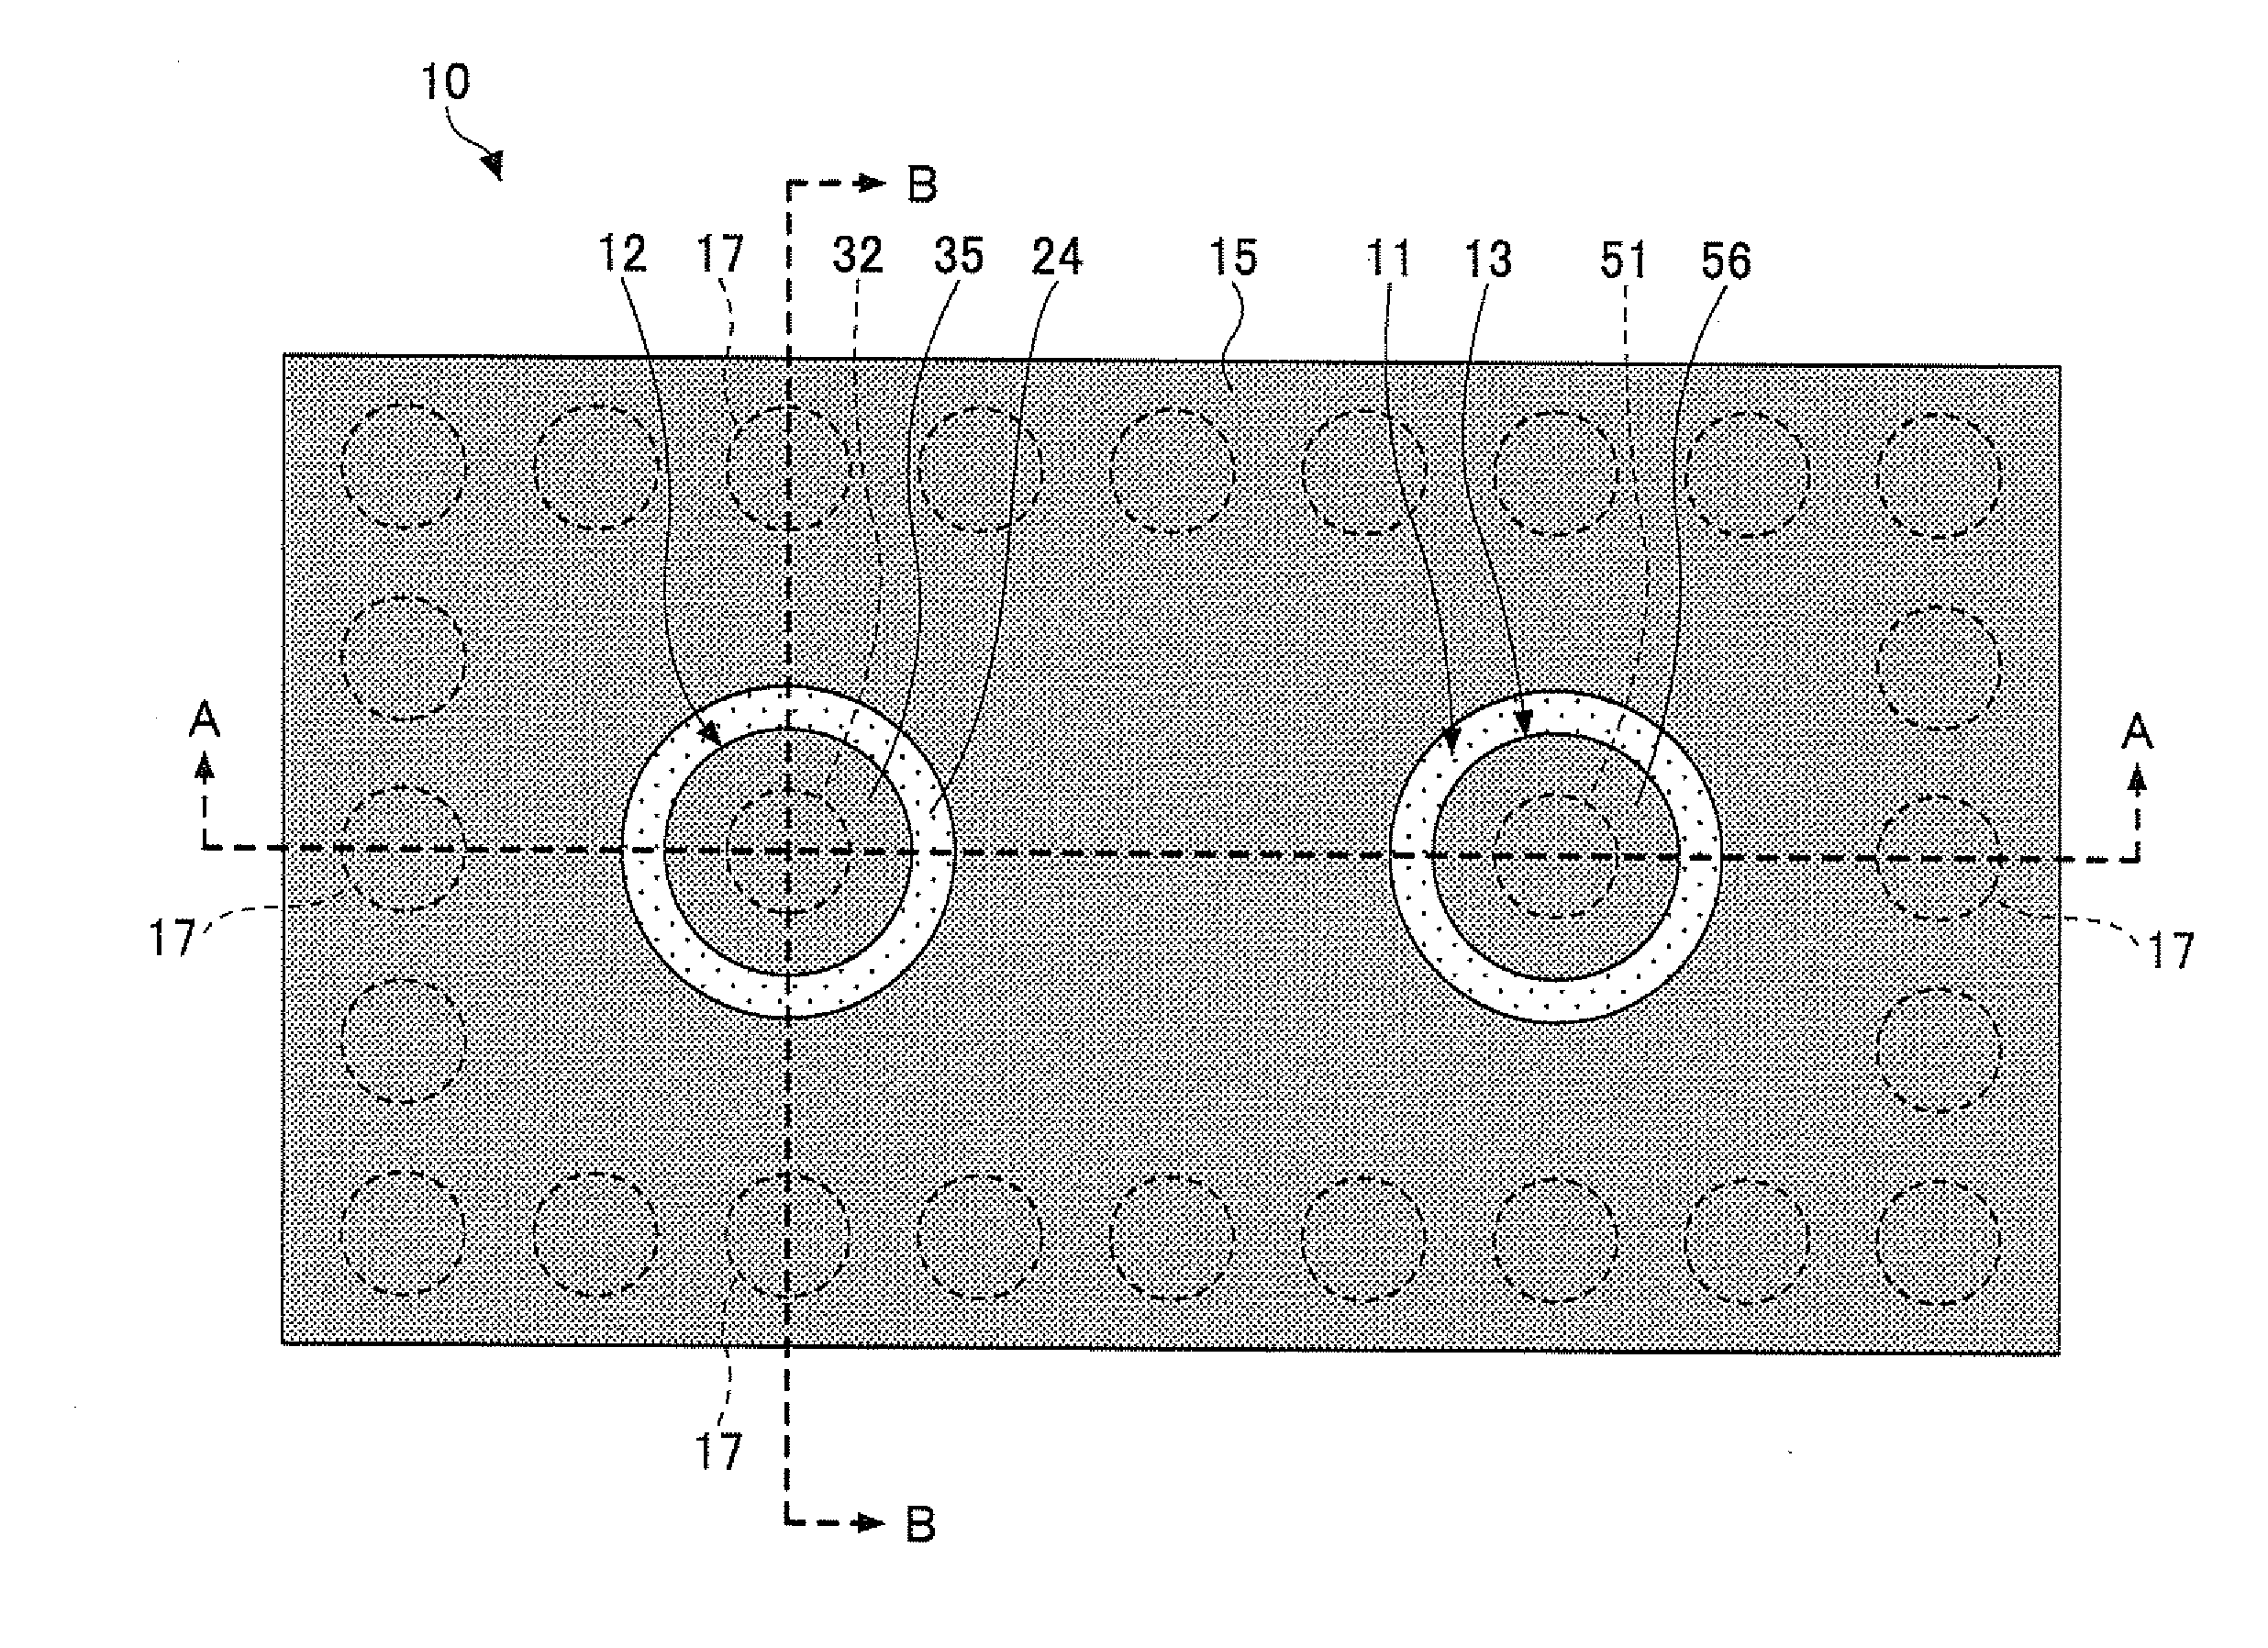 High-frequency line structure on resin substrate and method of manufacturing the same